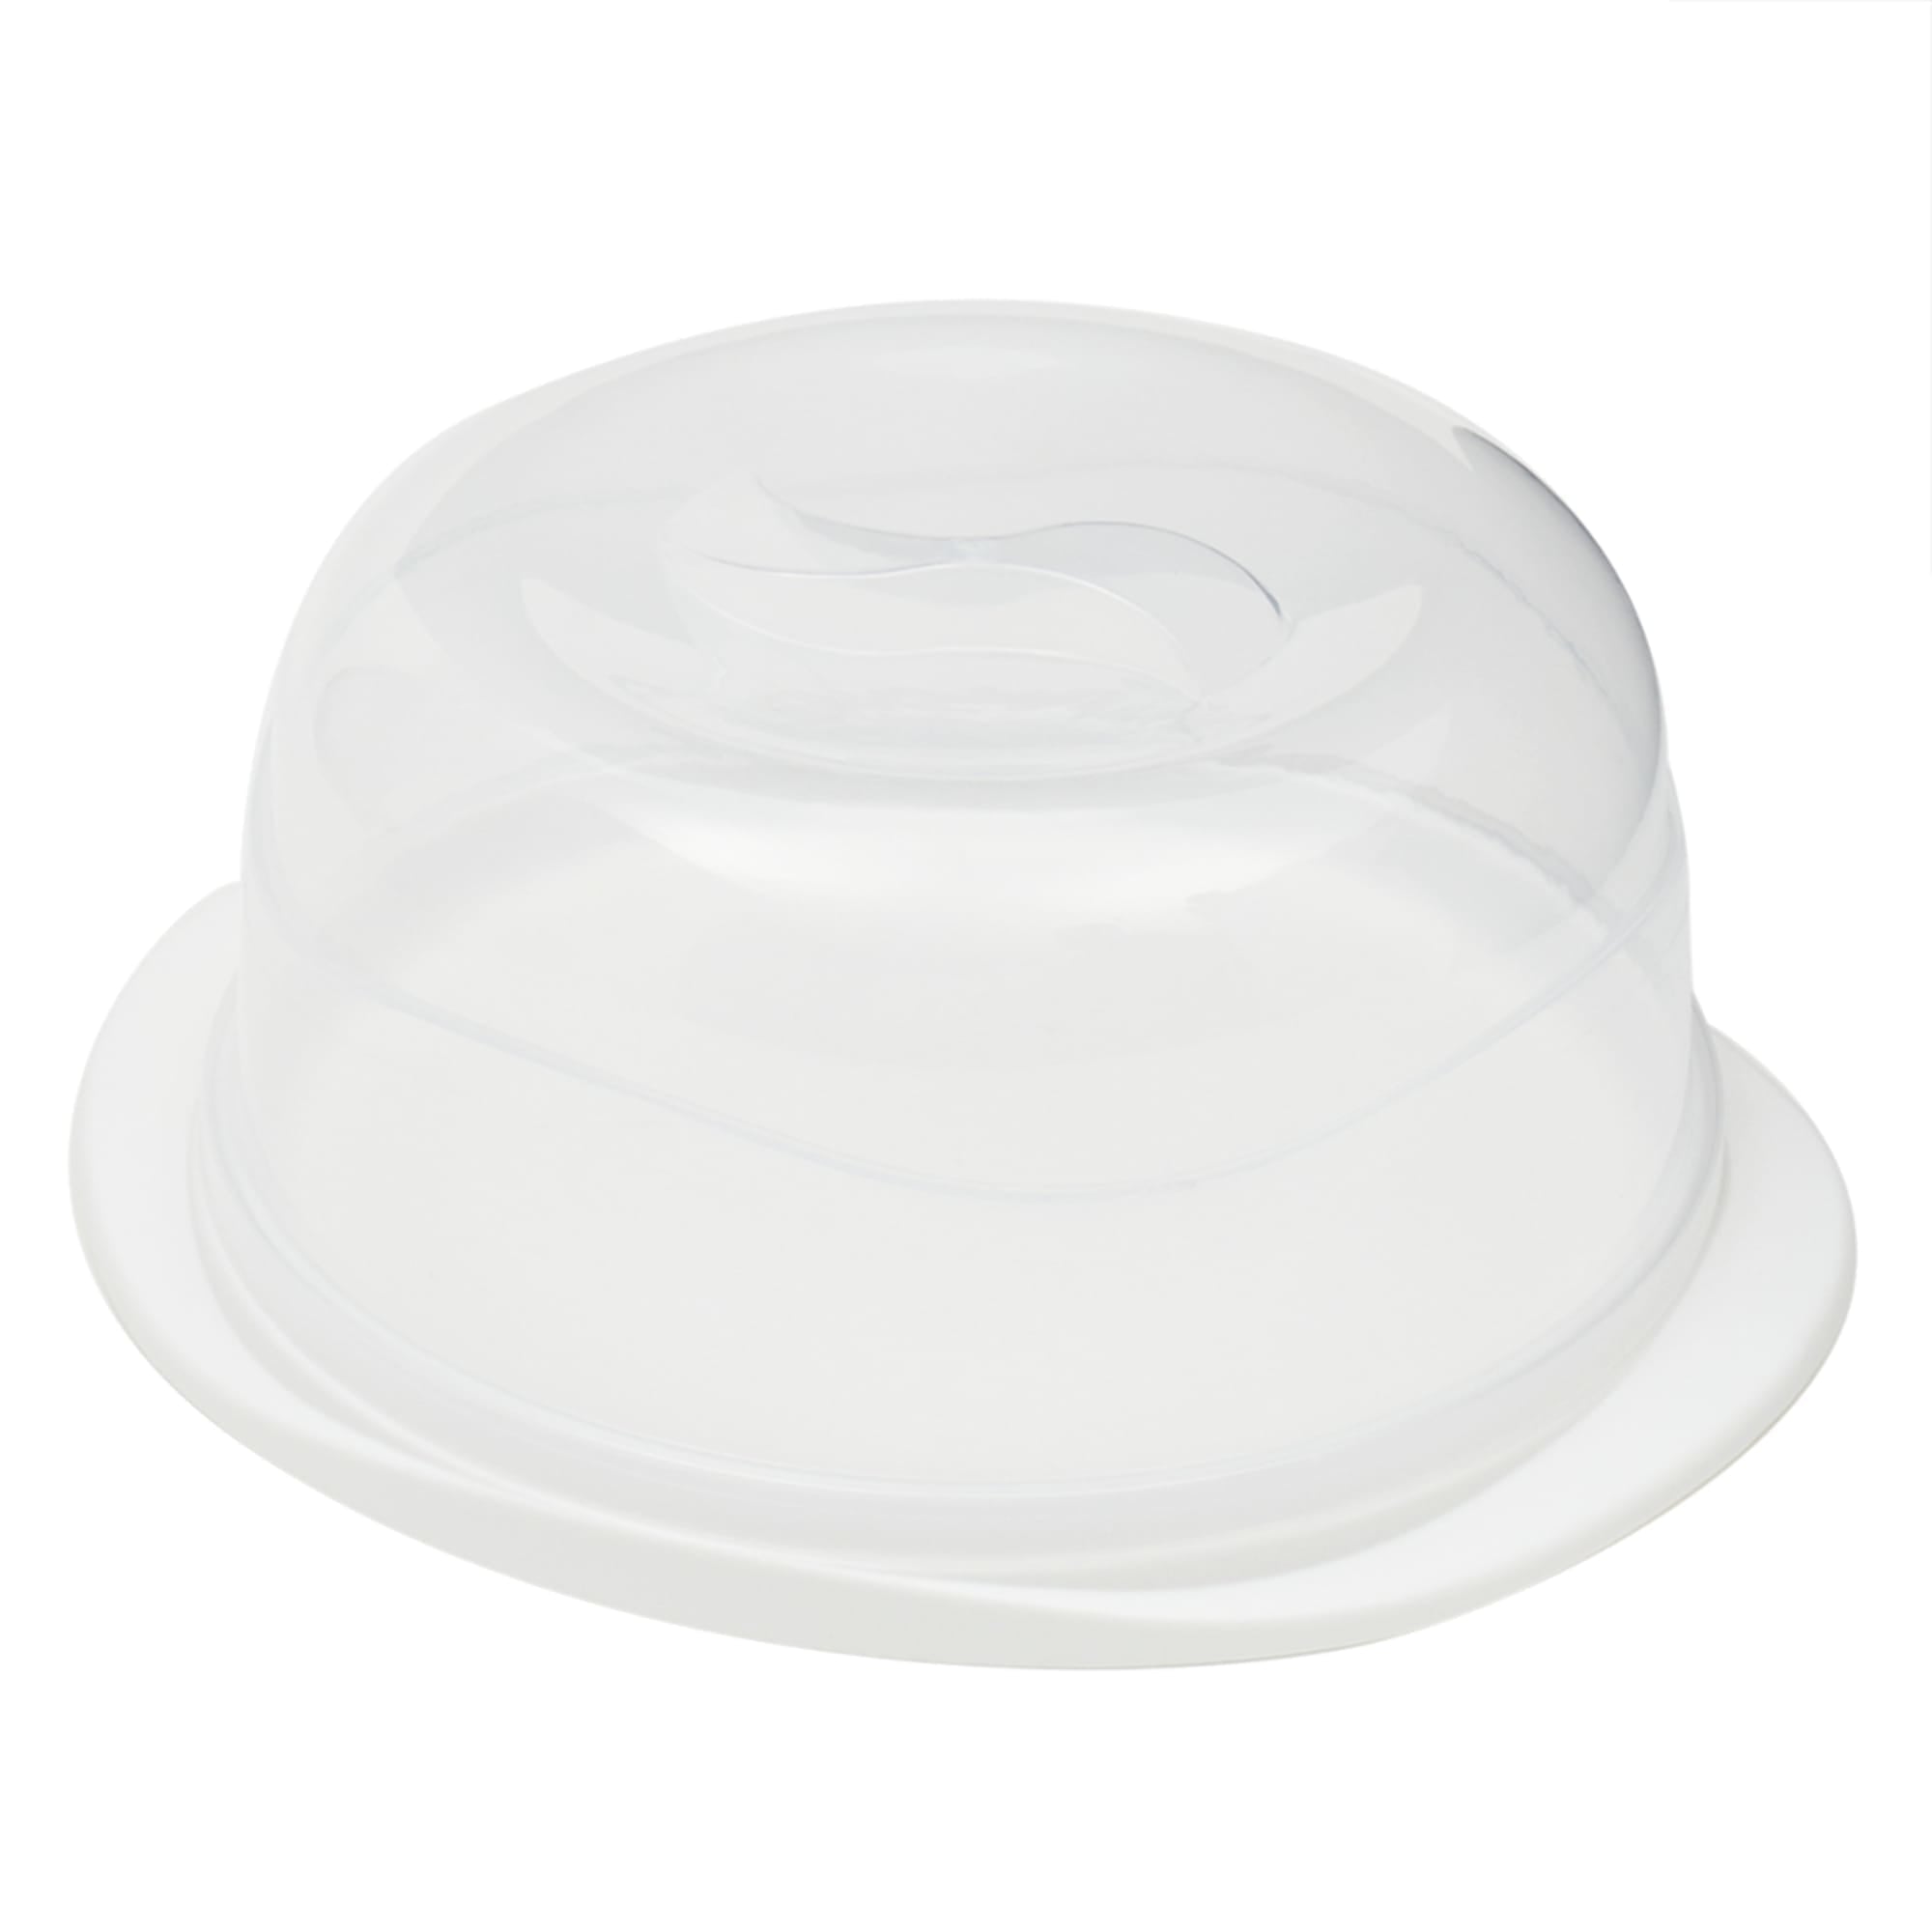 Home Basics Round Cake Keeper with Lid $5.00 EACH, CASE PACK OF 6